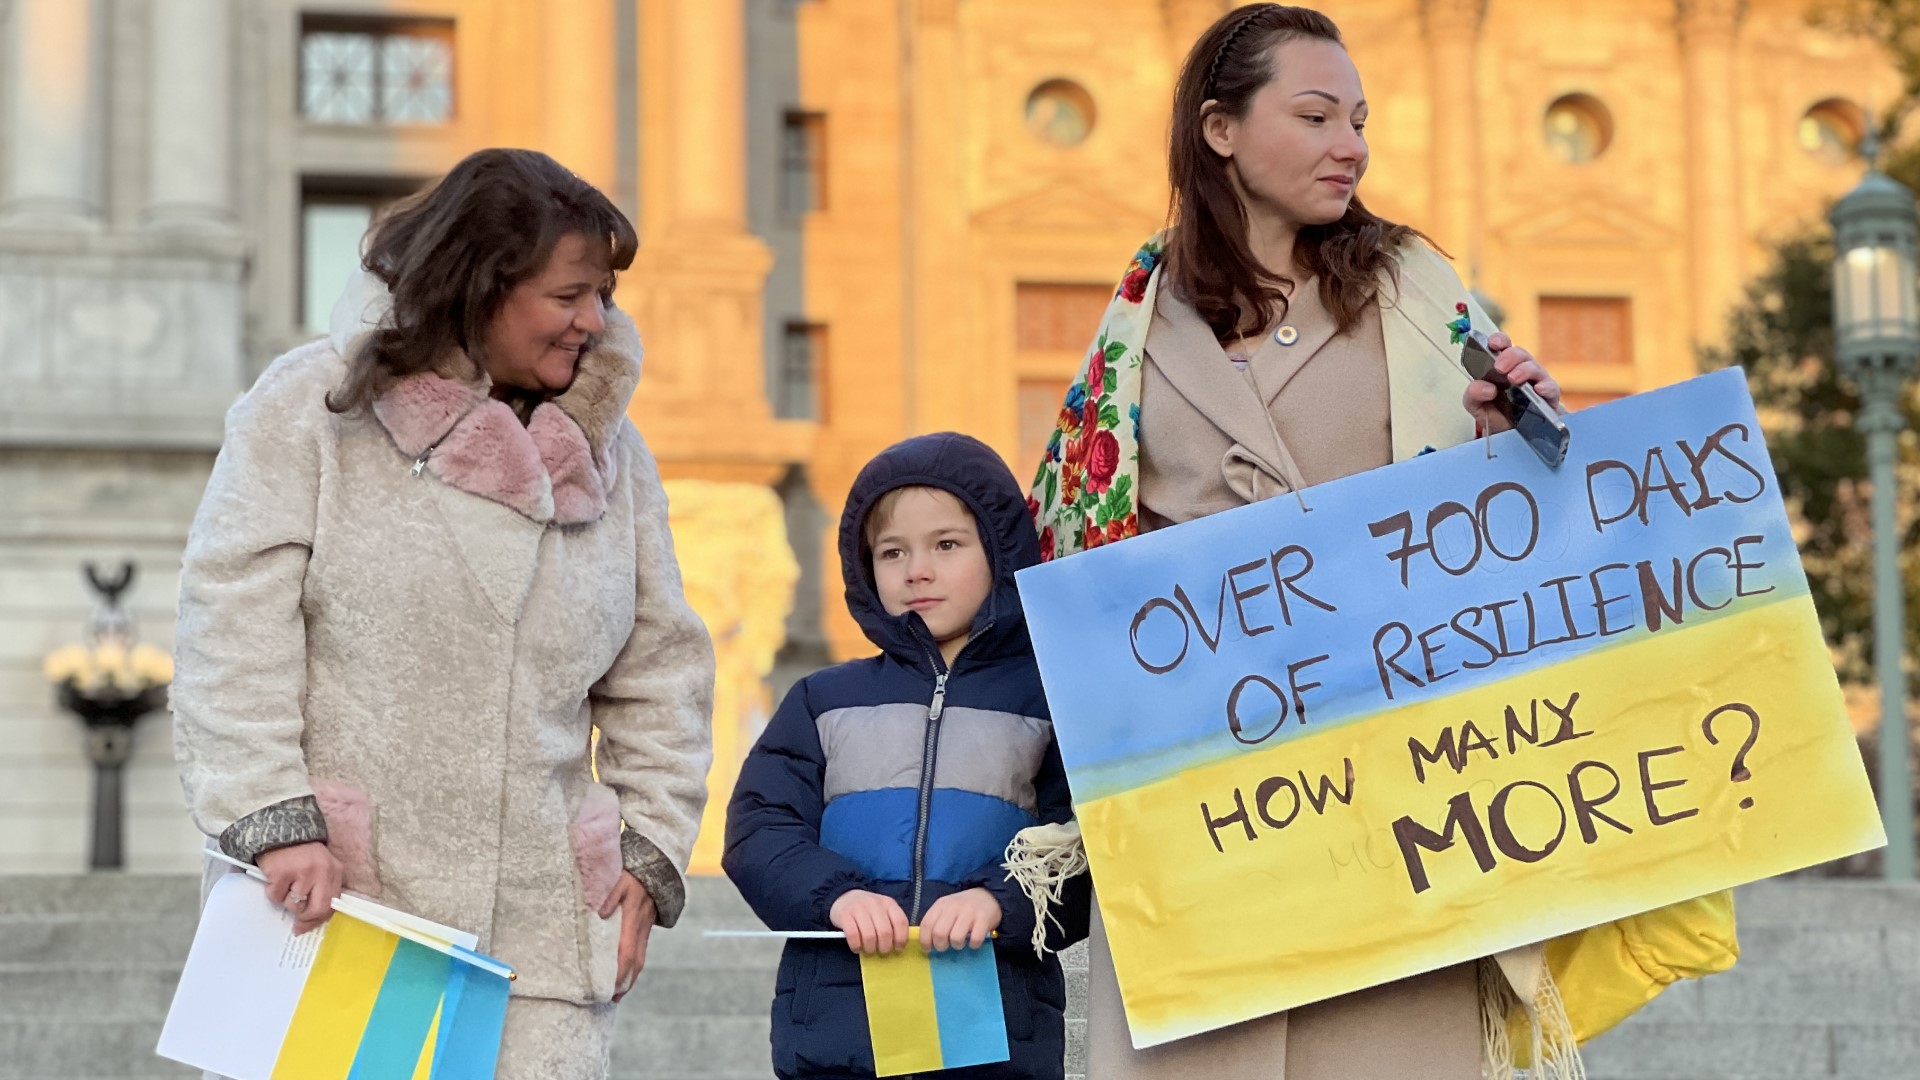 Central Pa. Supports Ukraine took to the steps of the state capitol on Monday, calling on the community to demand new aid.